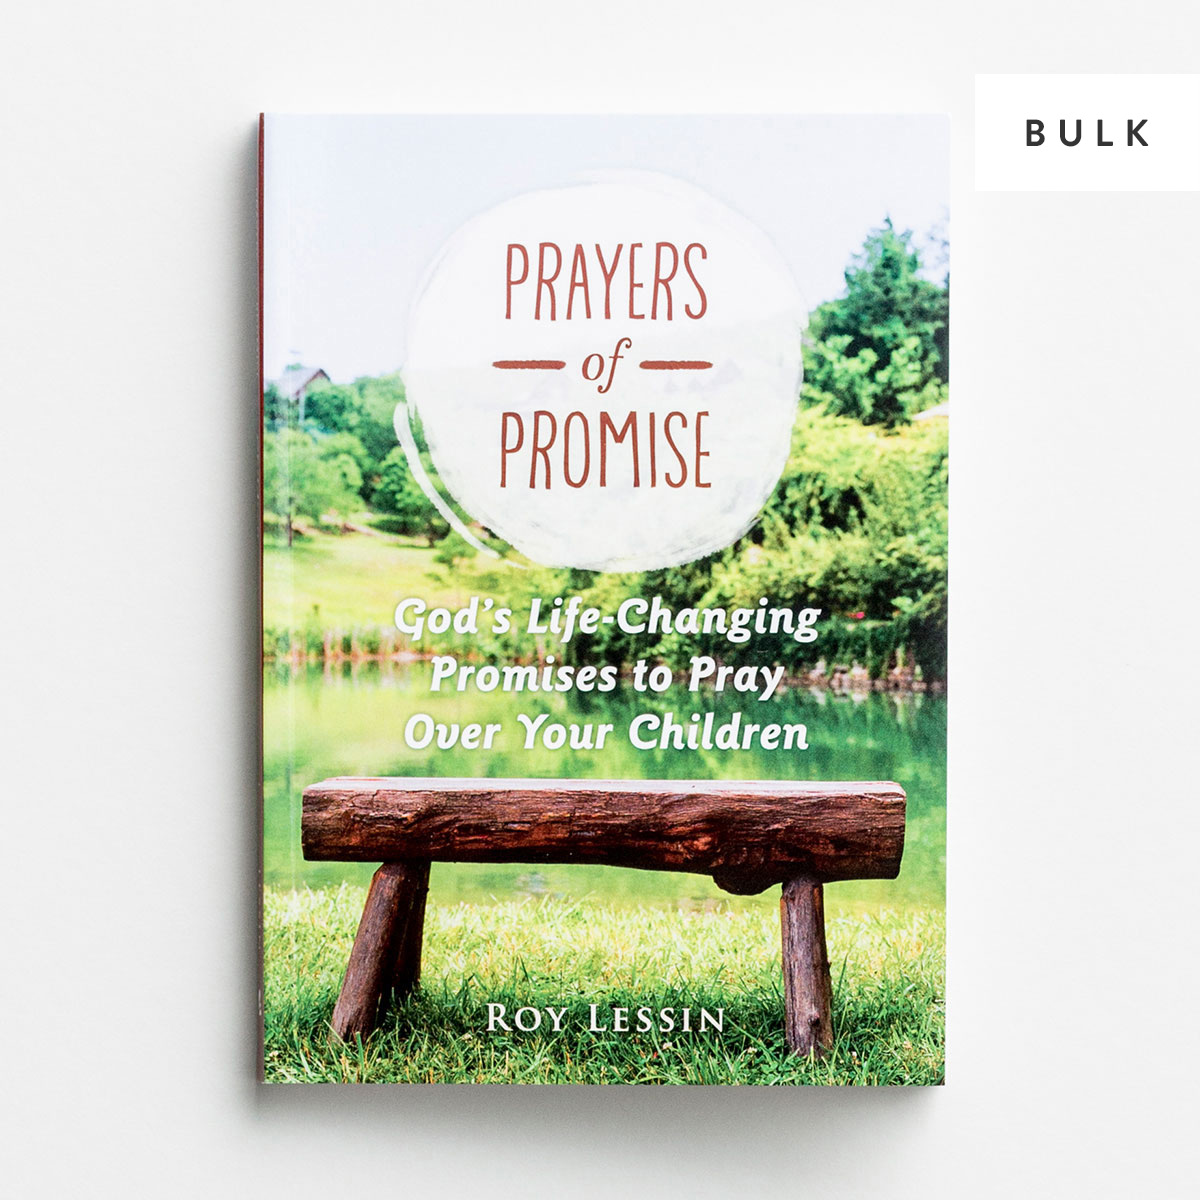 Prayers of Promise - God's Life-Changing Promises to Pray Over Your Children - 36 Books - Bulk Discount